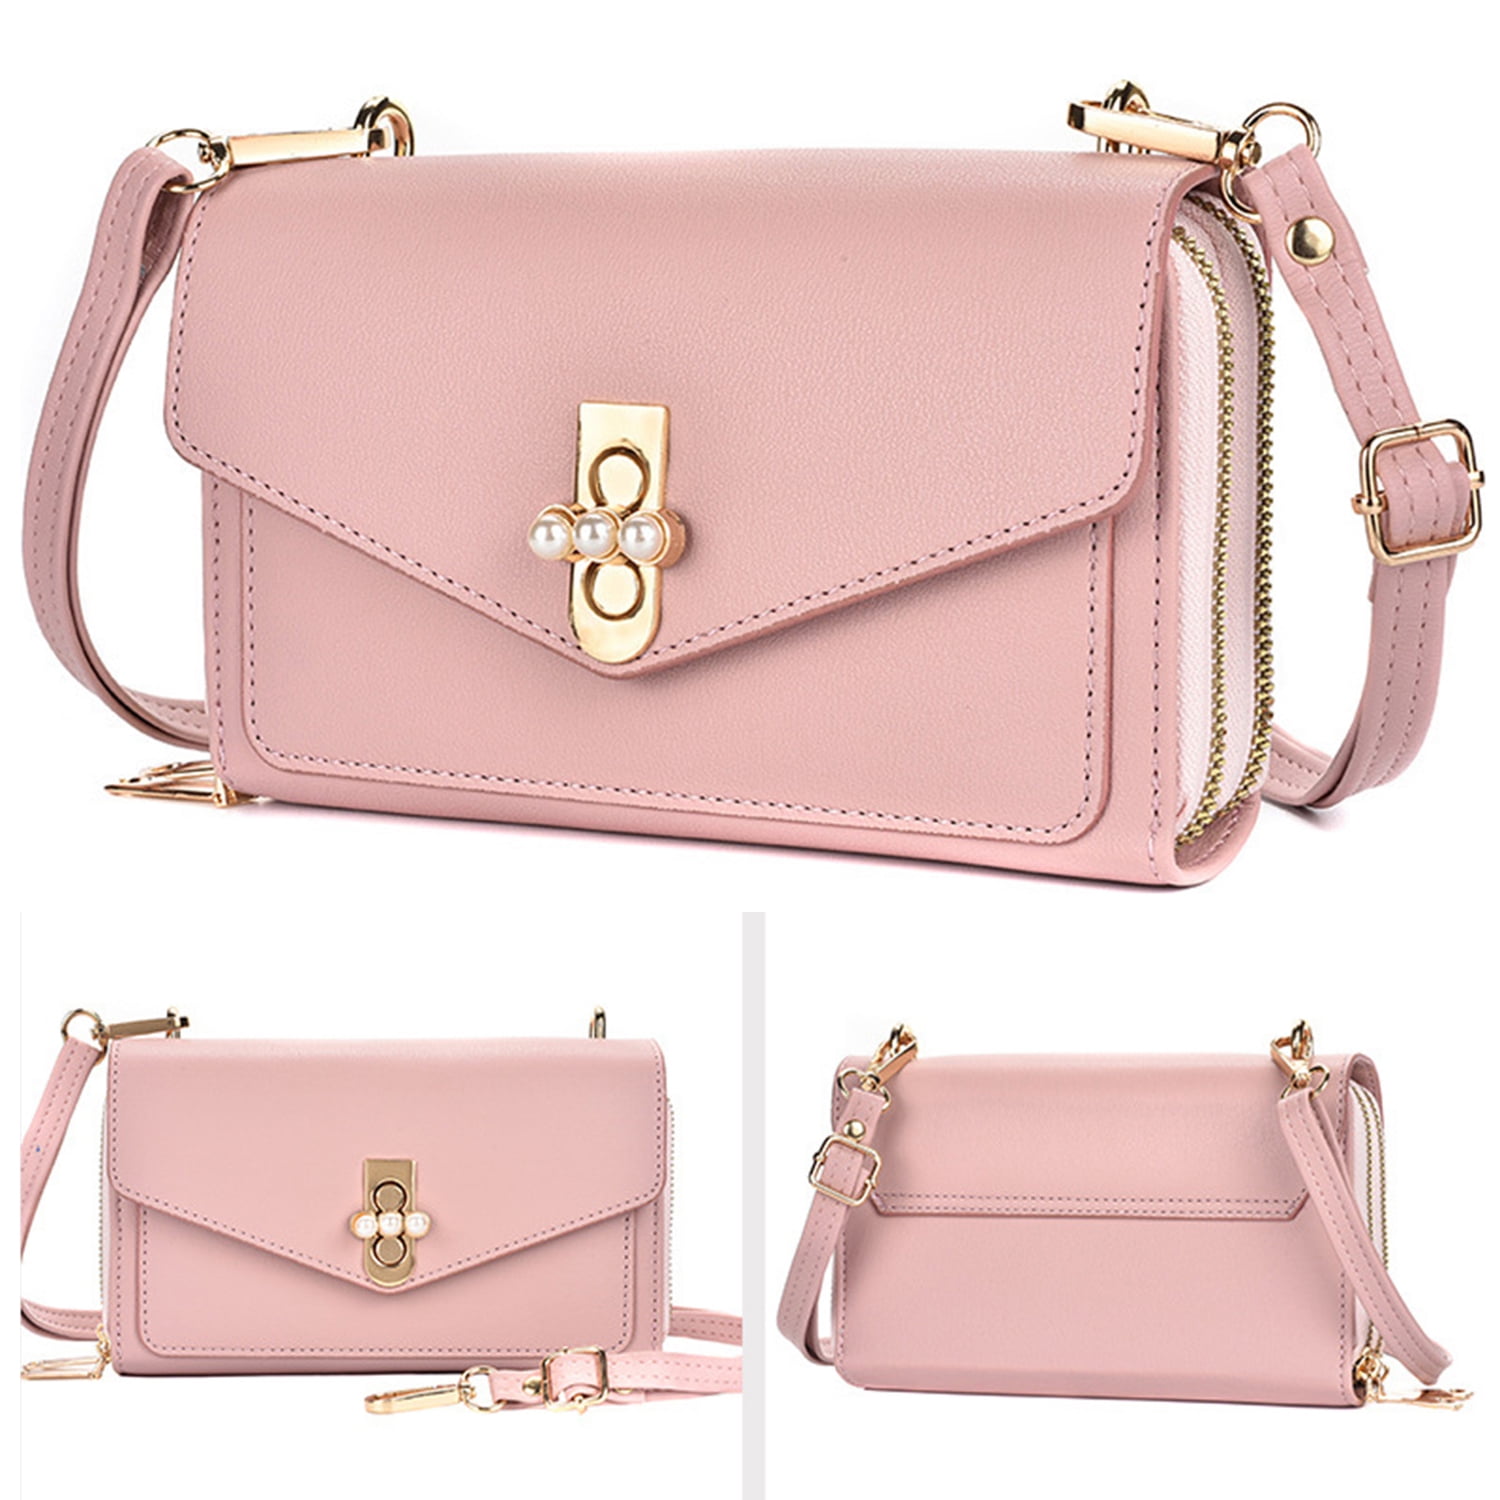 Women Designer Bag Handbags 10A Crossbody Flap Pink Bags Qulited Solid Hasp  Chains Strap Totes Wallet Clutch Shoulder Bag Girl Lady Black Real Leather  Square Purse From Fashionbag9988, $53.47 | DHgate.Com